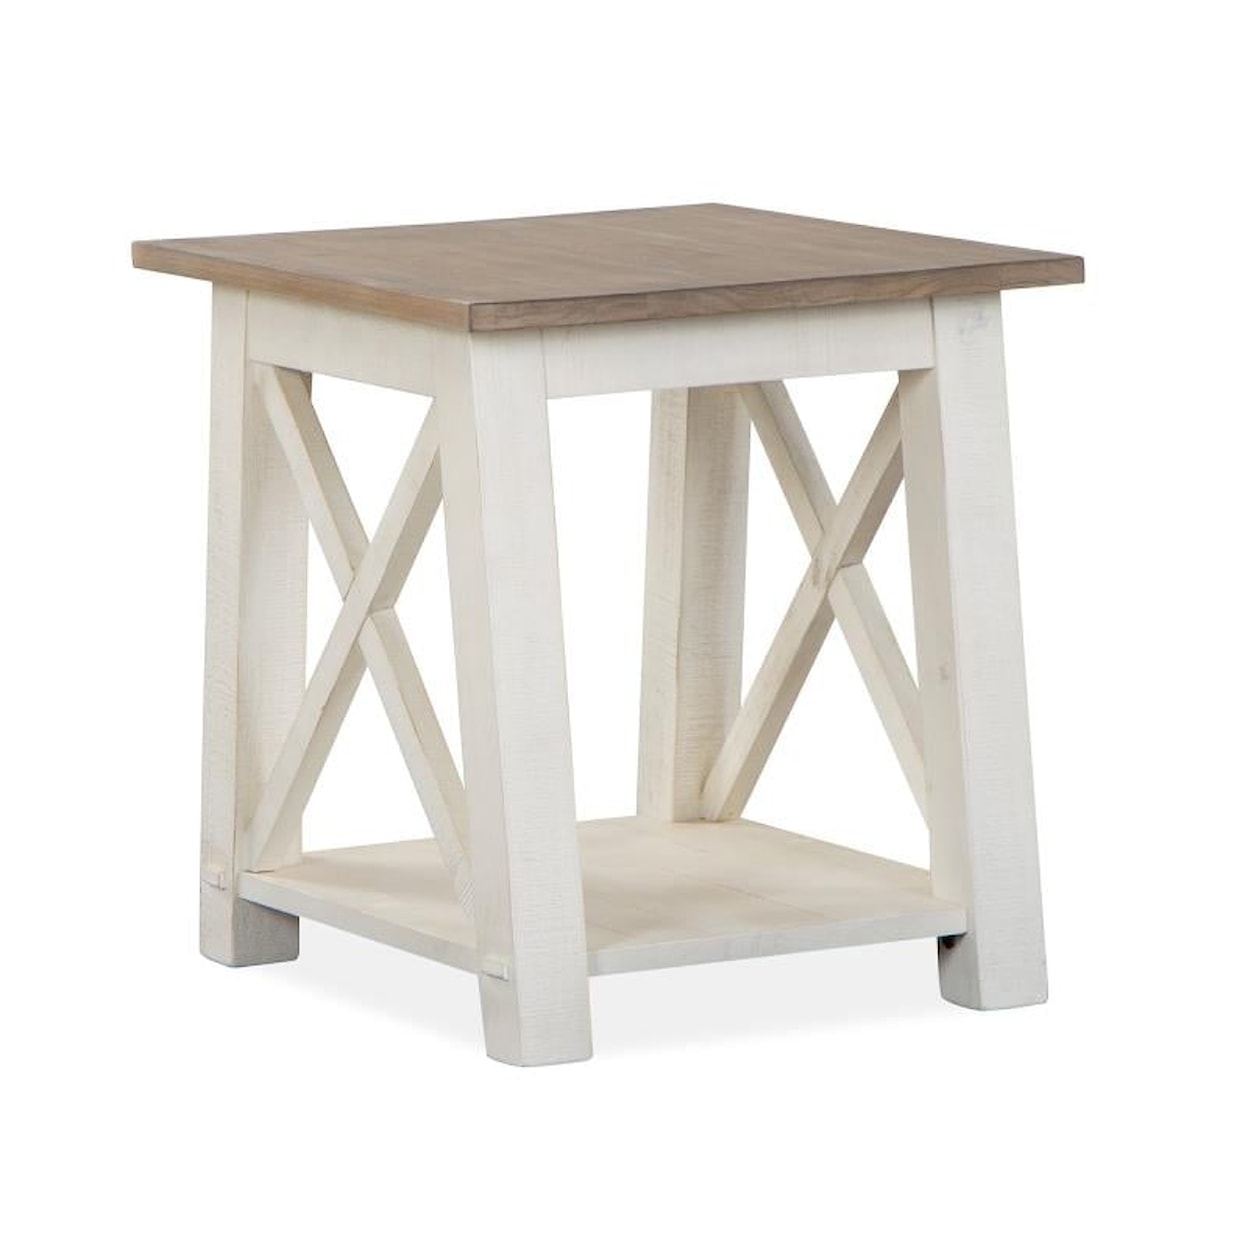 Magnussen Home Sedley Occasional Tables Rectangular End Table